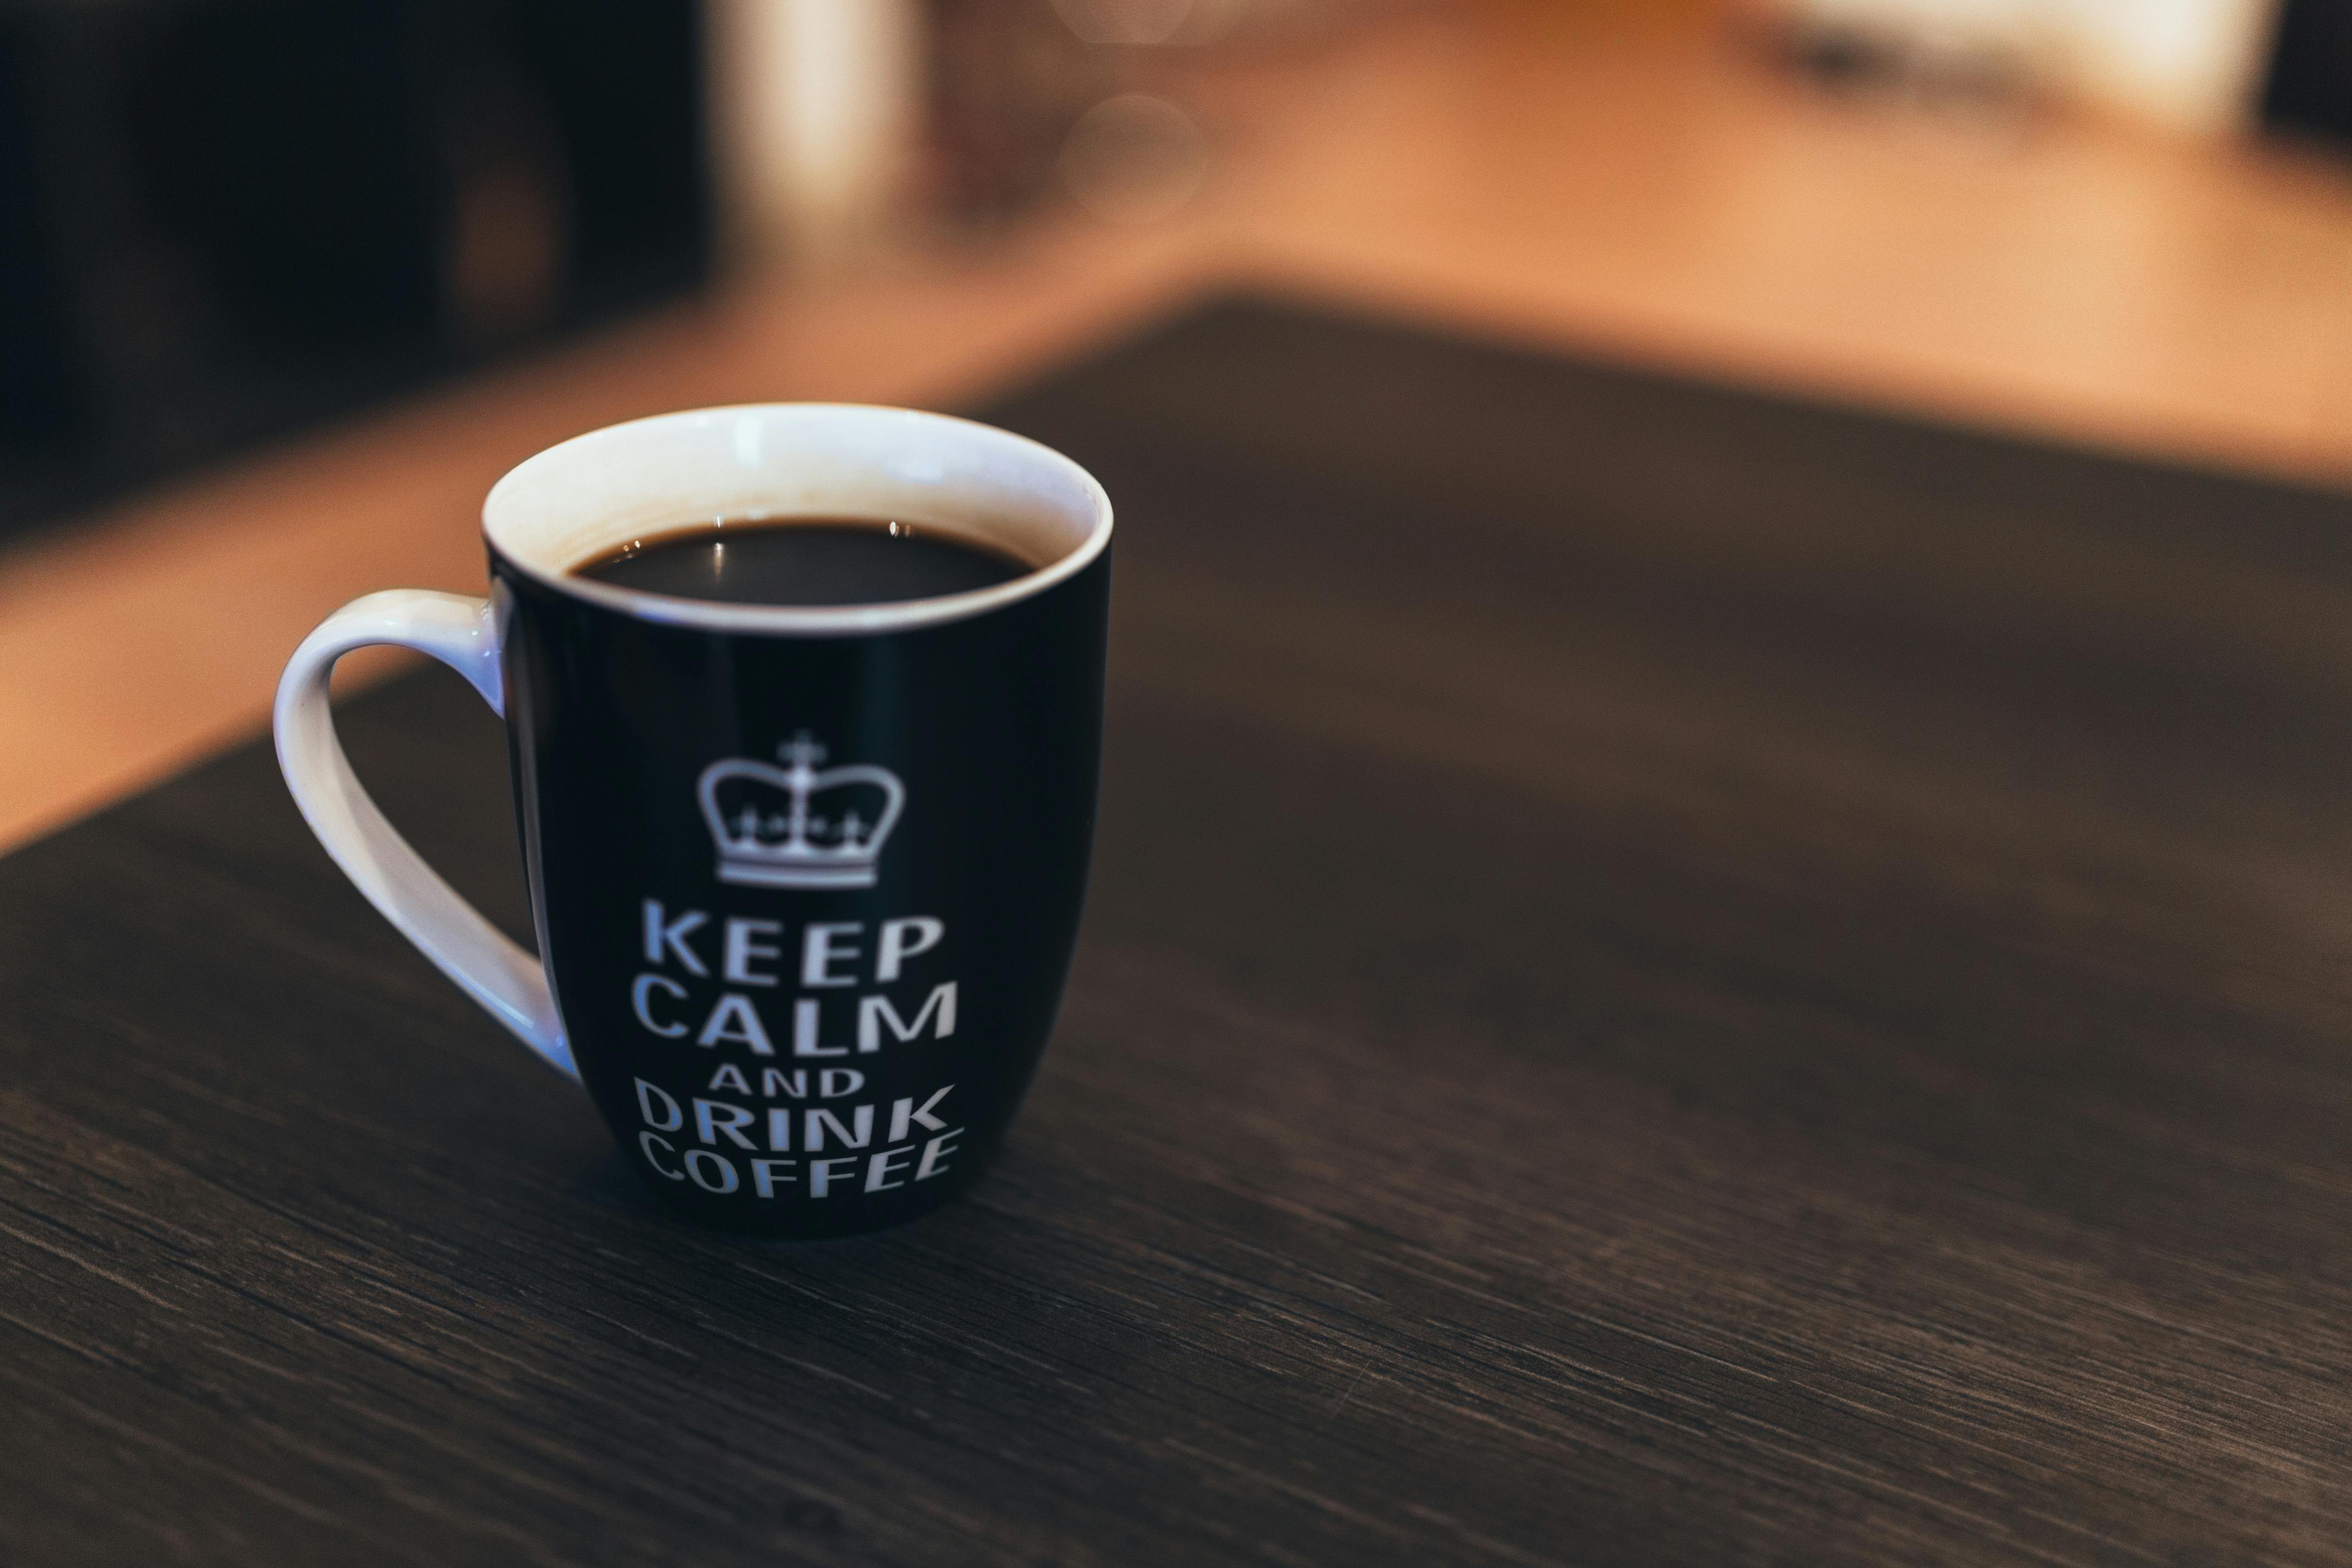 Keep Calm Photos, Download The BEST Free Keep Calm Stock Photos & HD Images